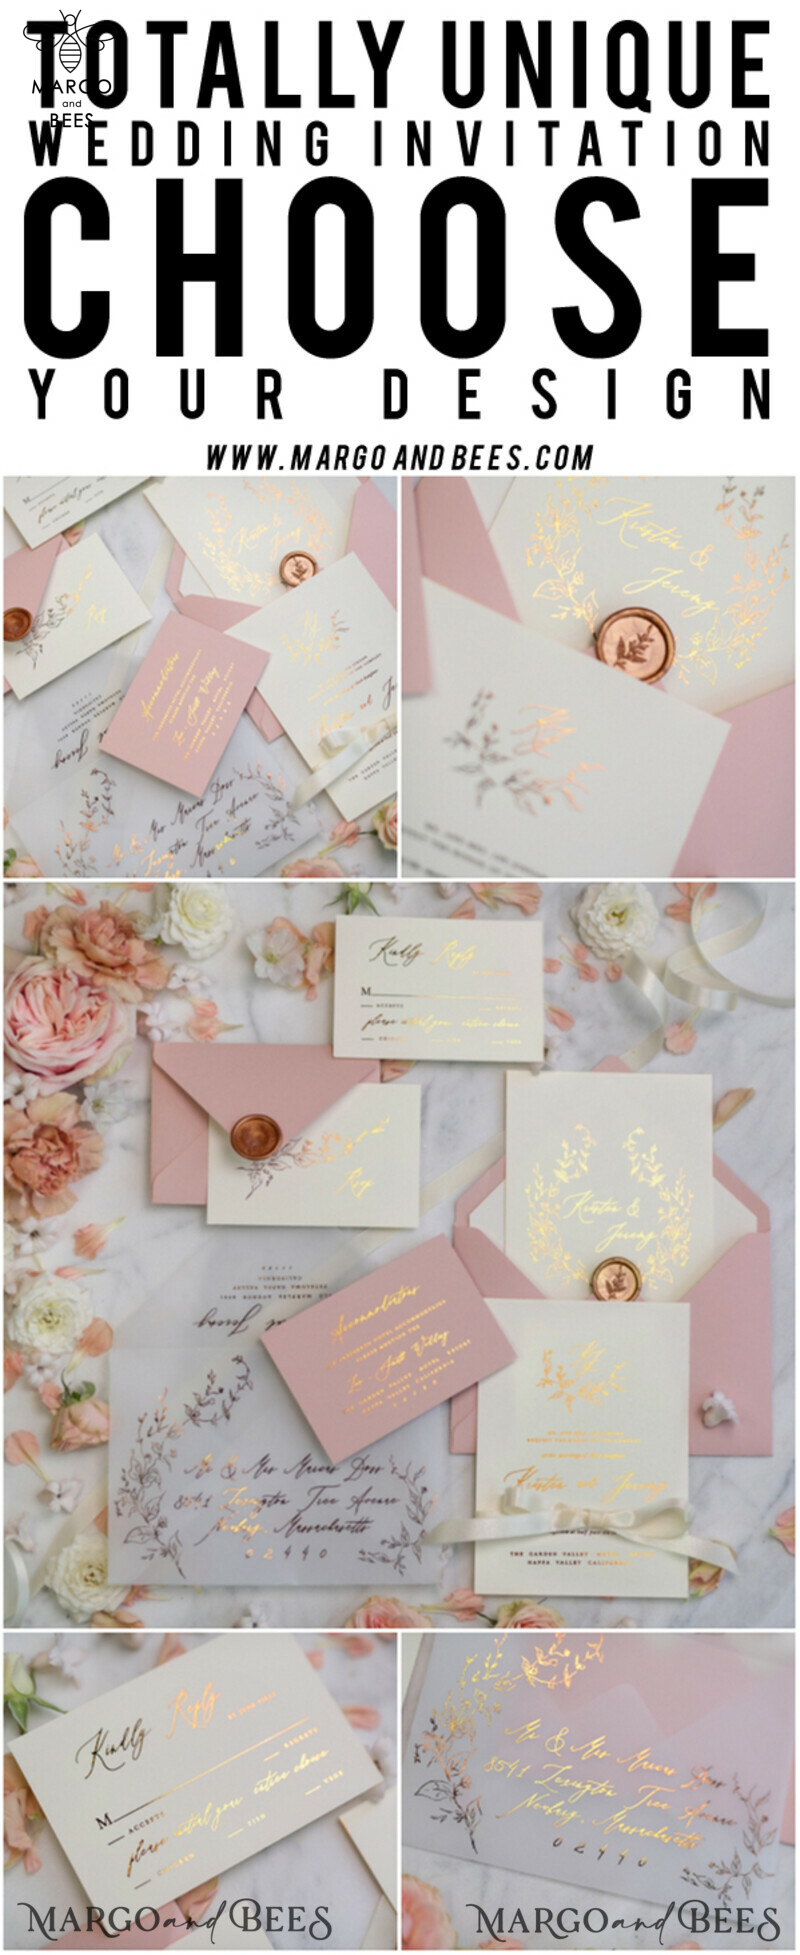 Bespoke Vellum Wedding Invitation Suite: Romantic Blush Pink and Glamour Gold Foil with Elegant Golden Touch-37